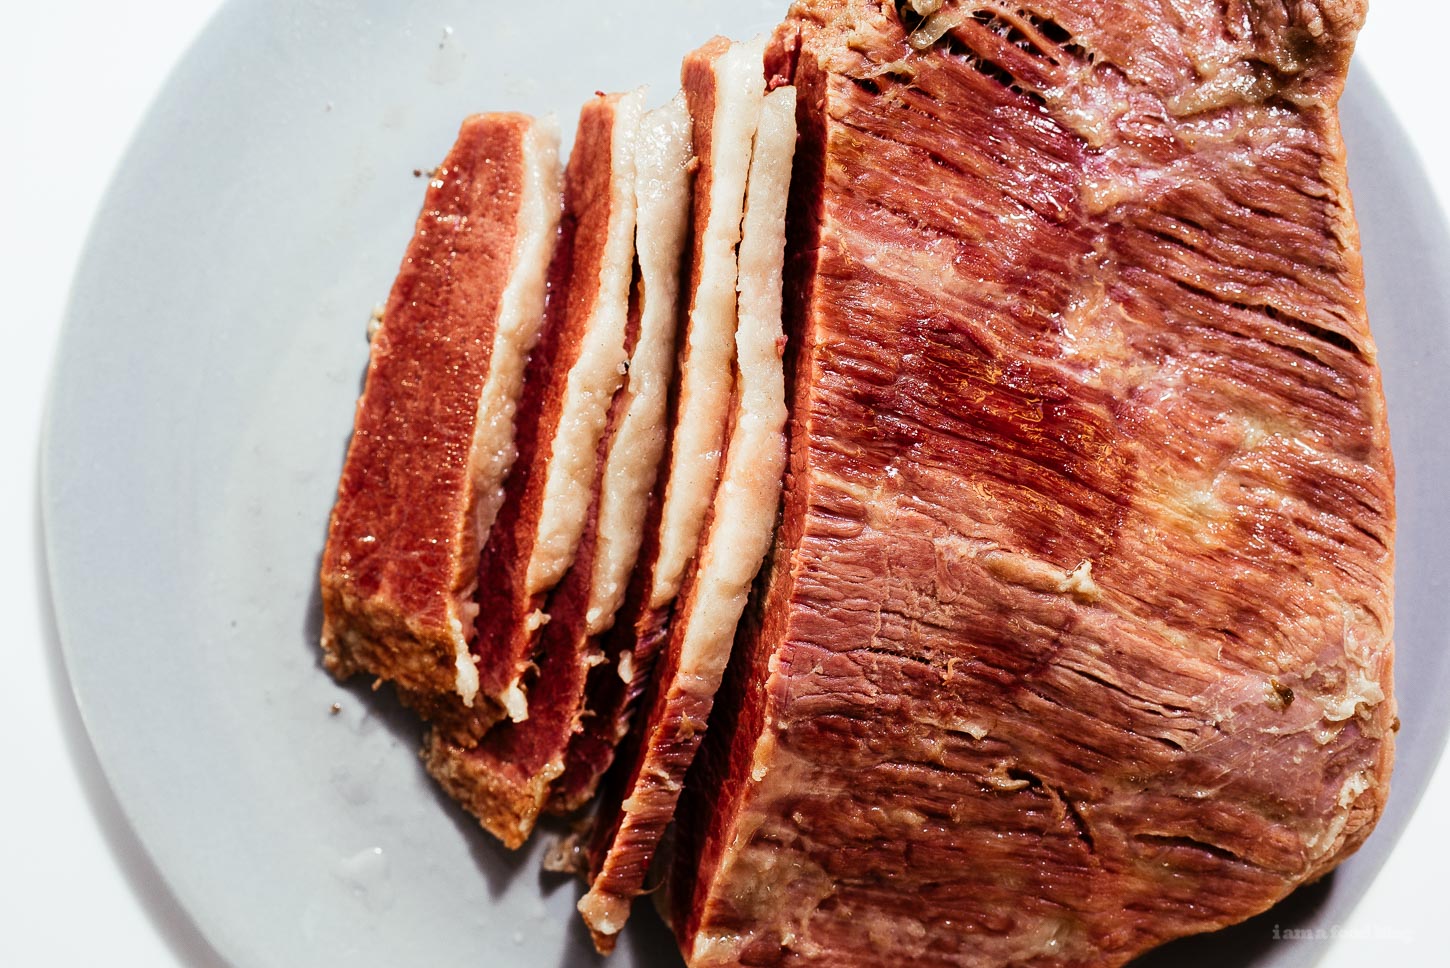 We’d planned a lot of dishes to use this beef for: corned beef hash, corned ...